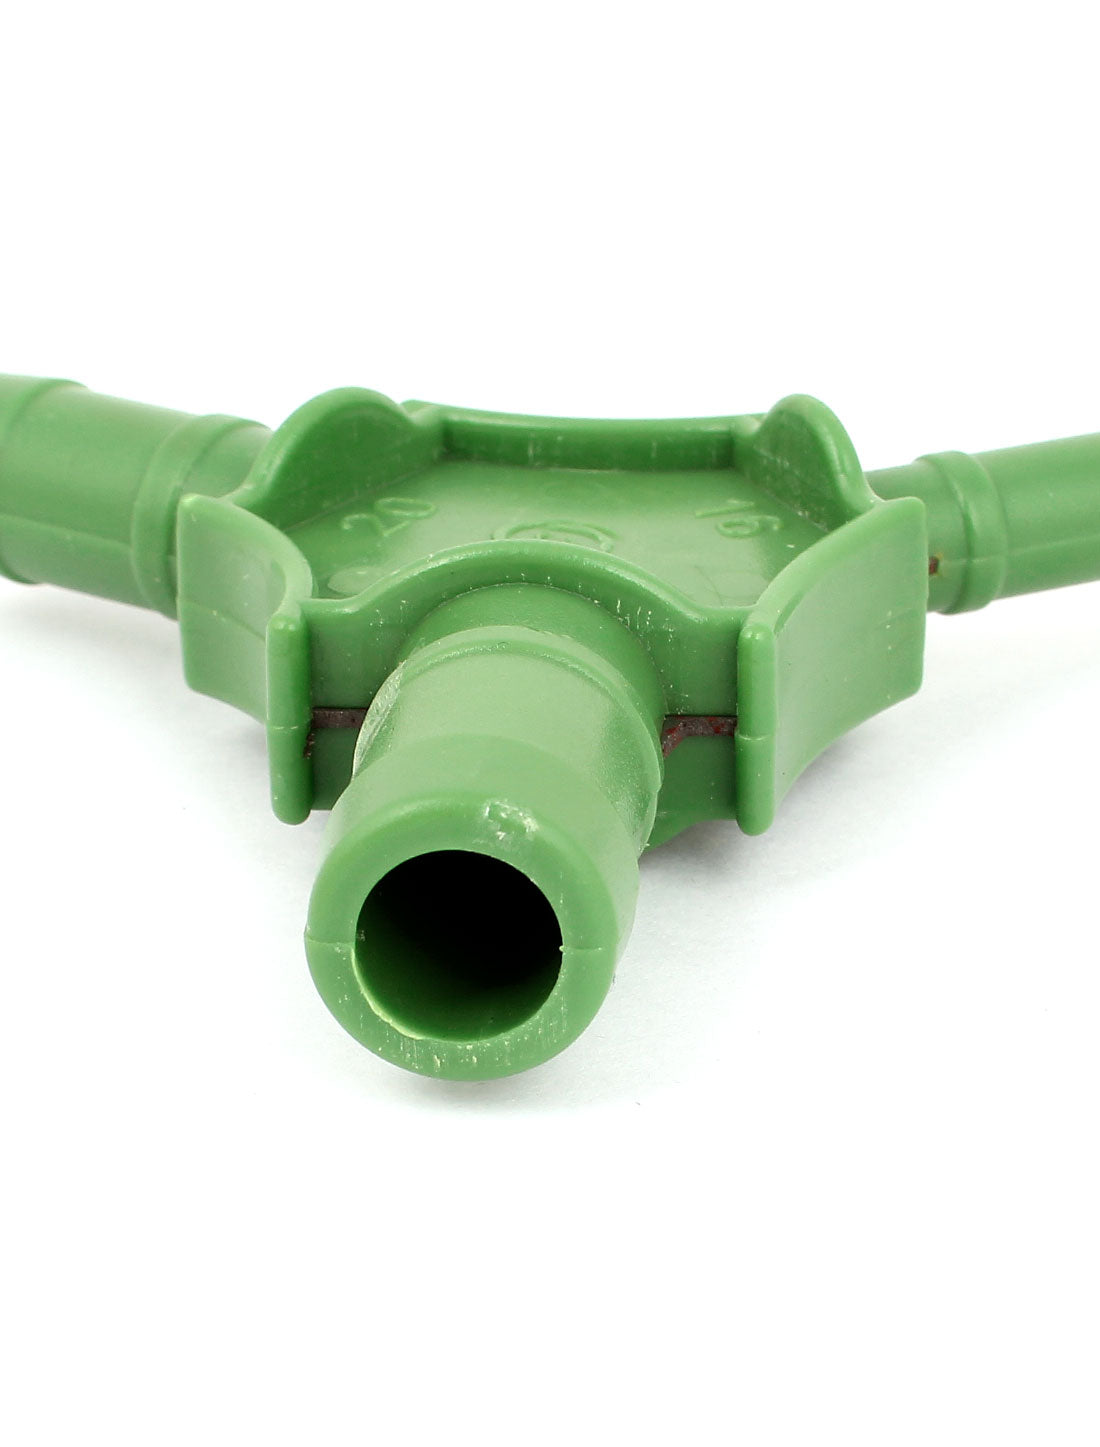 uxcell Uxcell Green PEX-AL Pex Pipe Reamer Cutter Tool for 12mm 16mm 20mm Tubing Plumbing